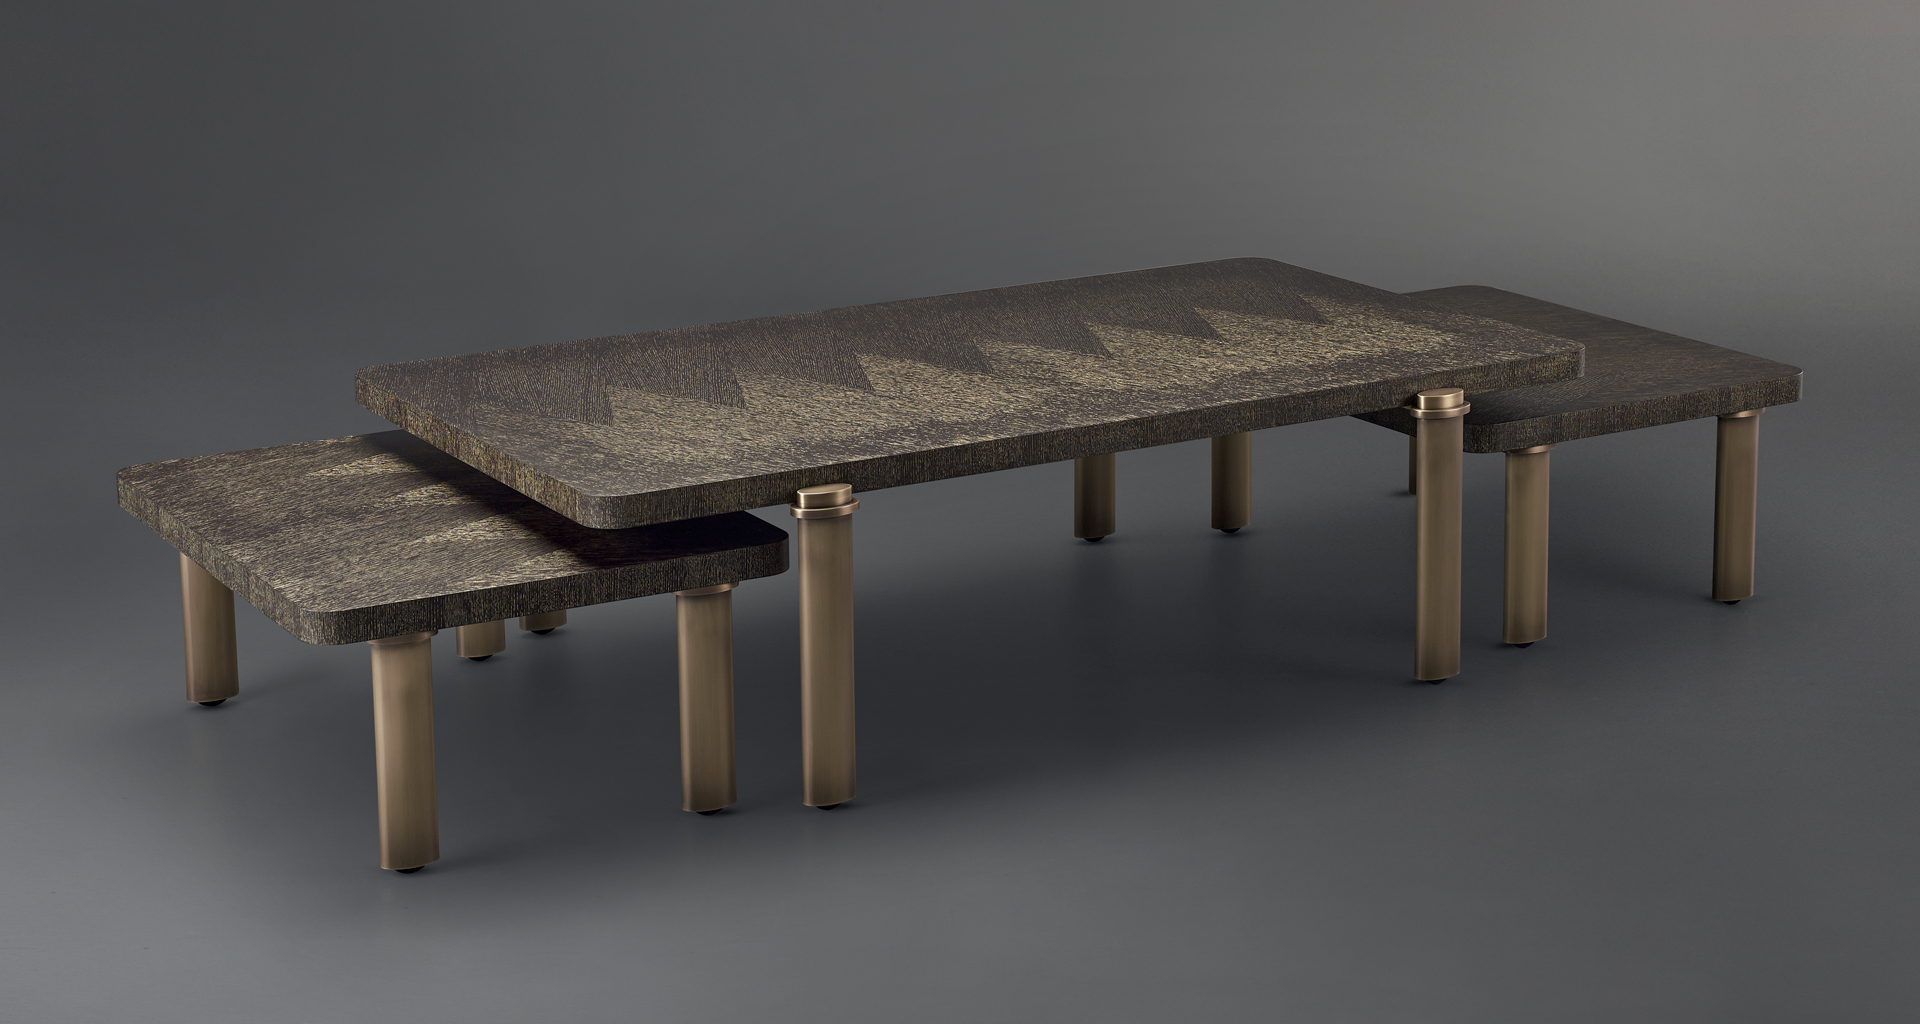 Passepartout are two wooden coffee tables with wheels and bronze decoration, from Promemoria's catalogue | Promemoria